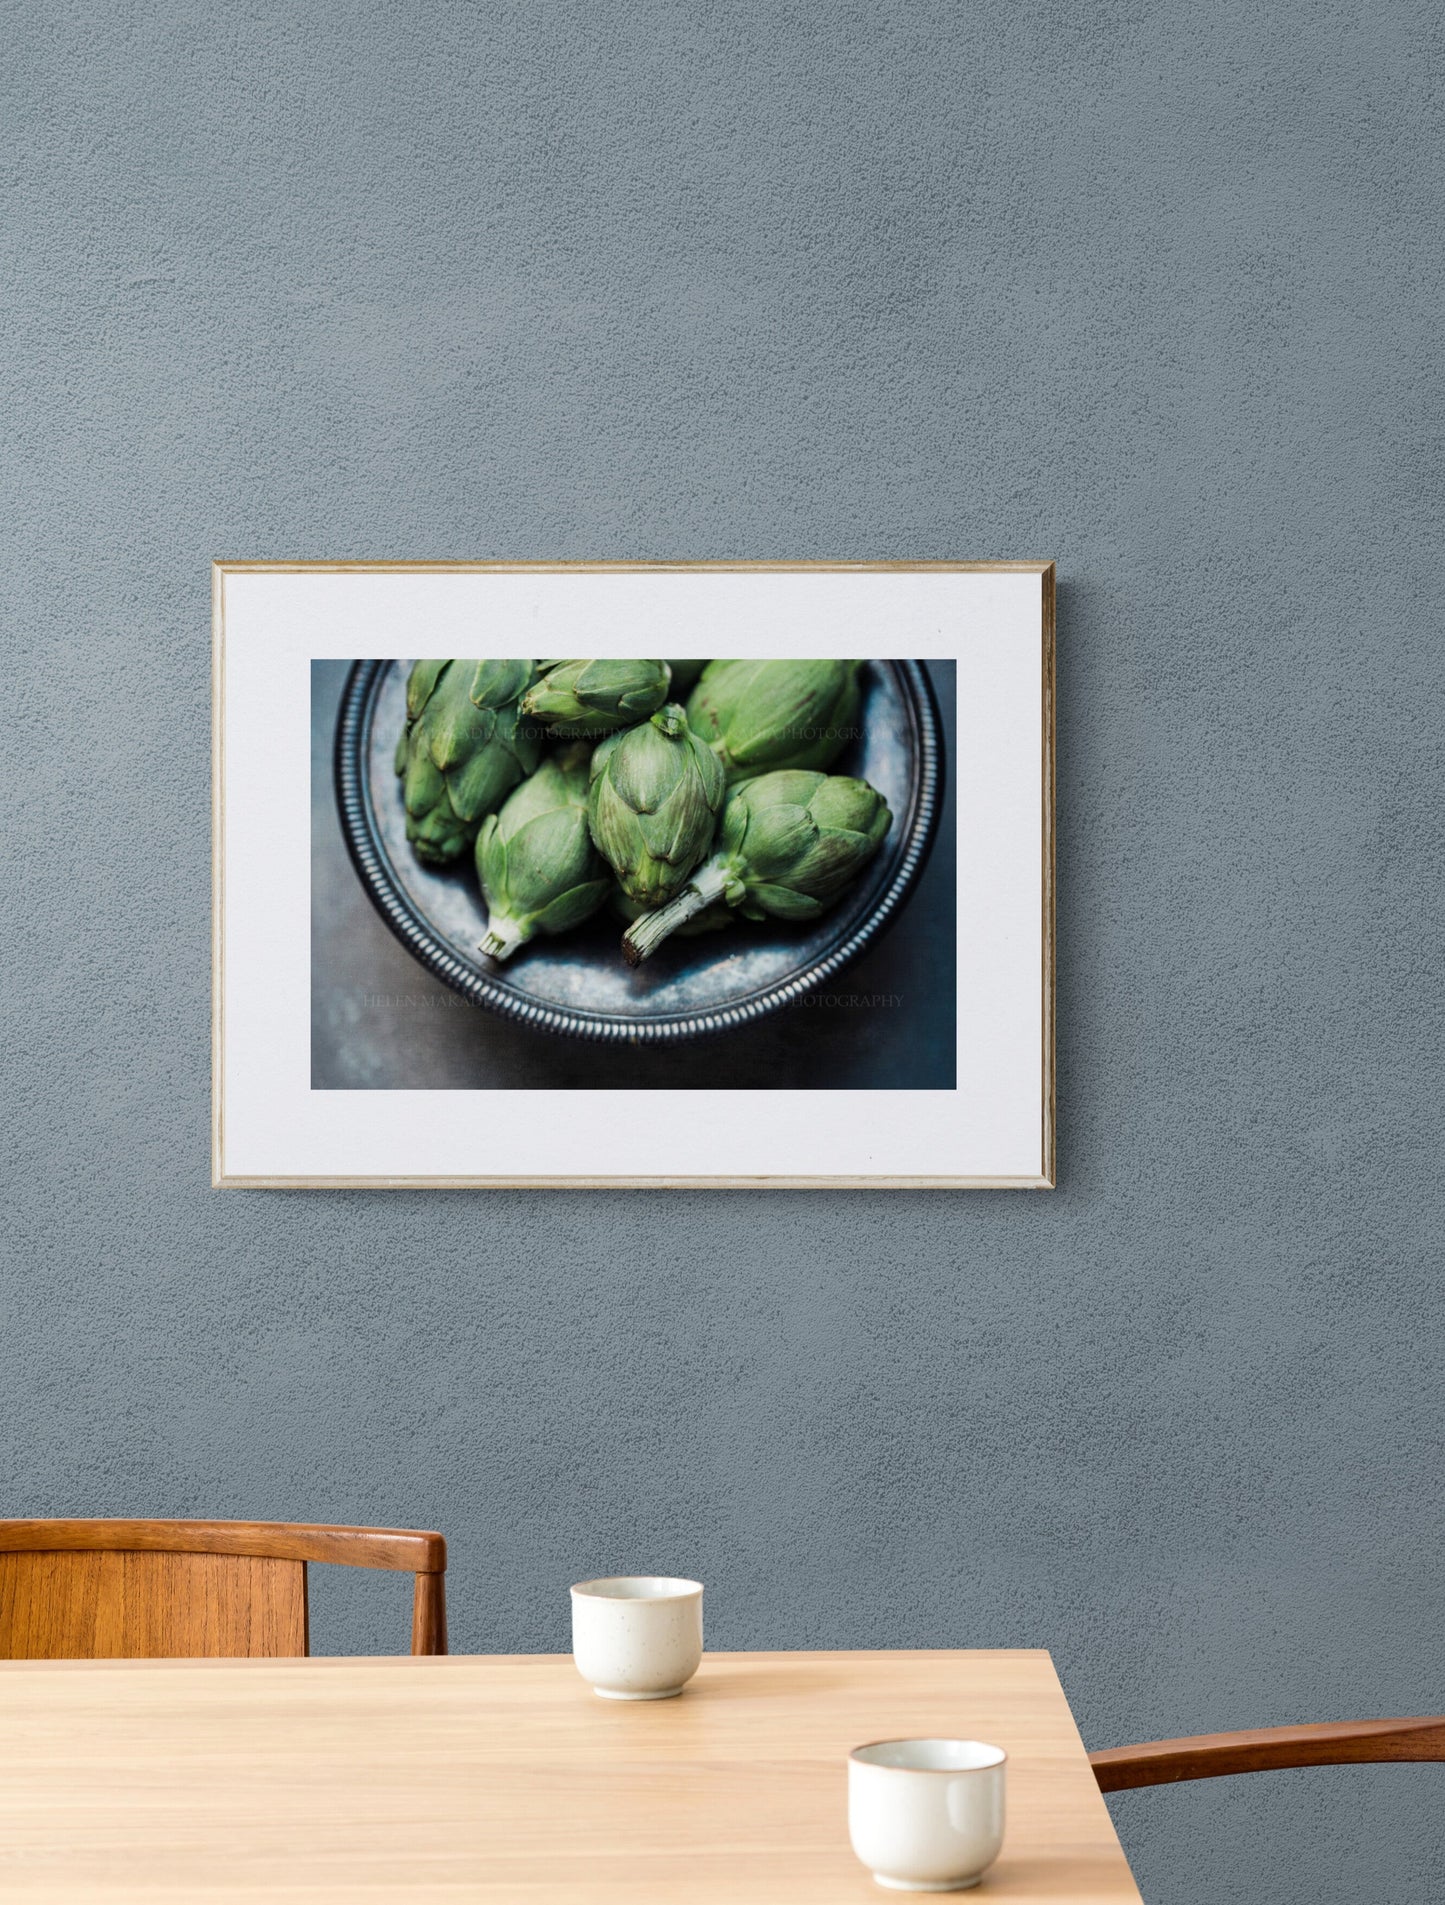 Artichokes Photograph as Wall Art in a Dining Room